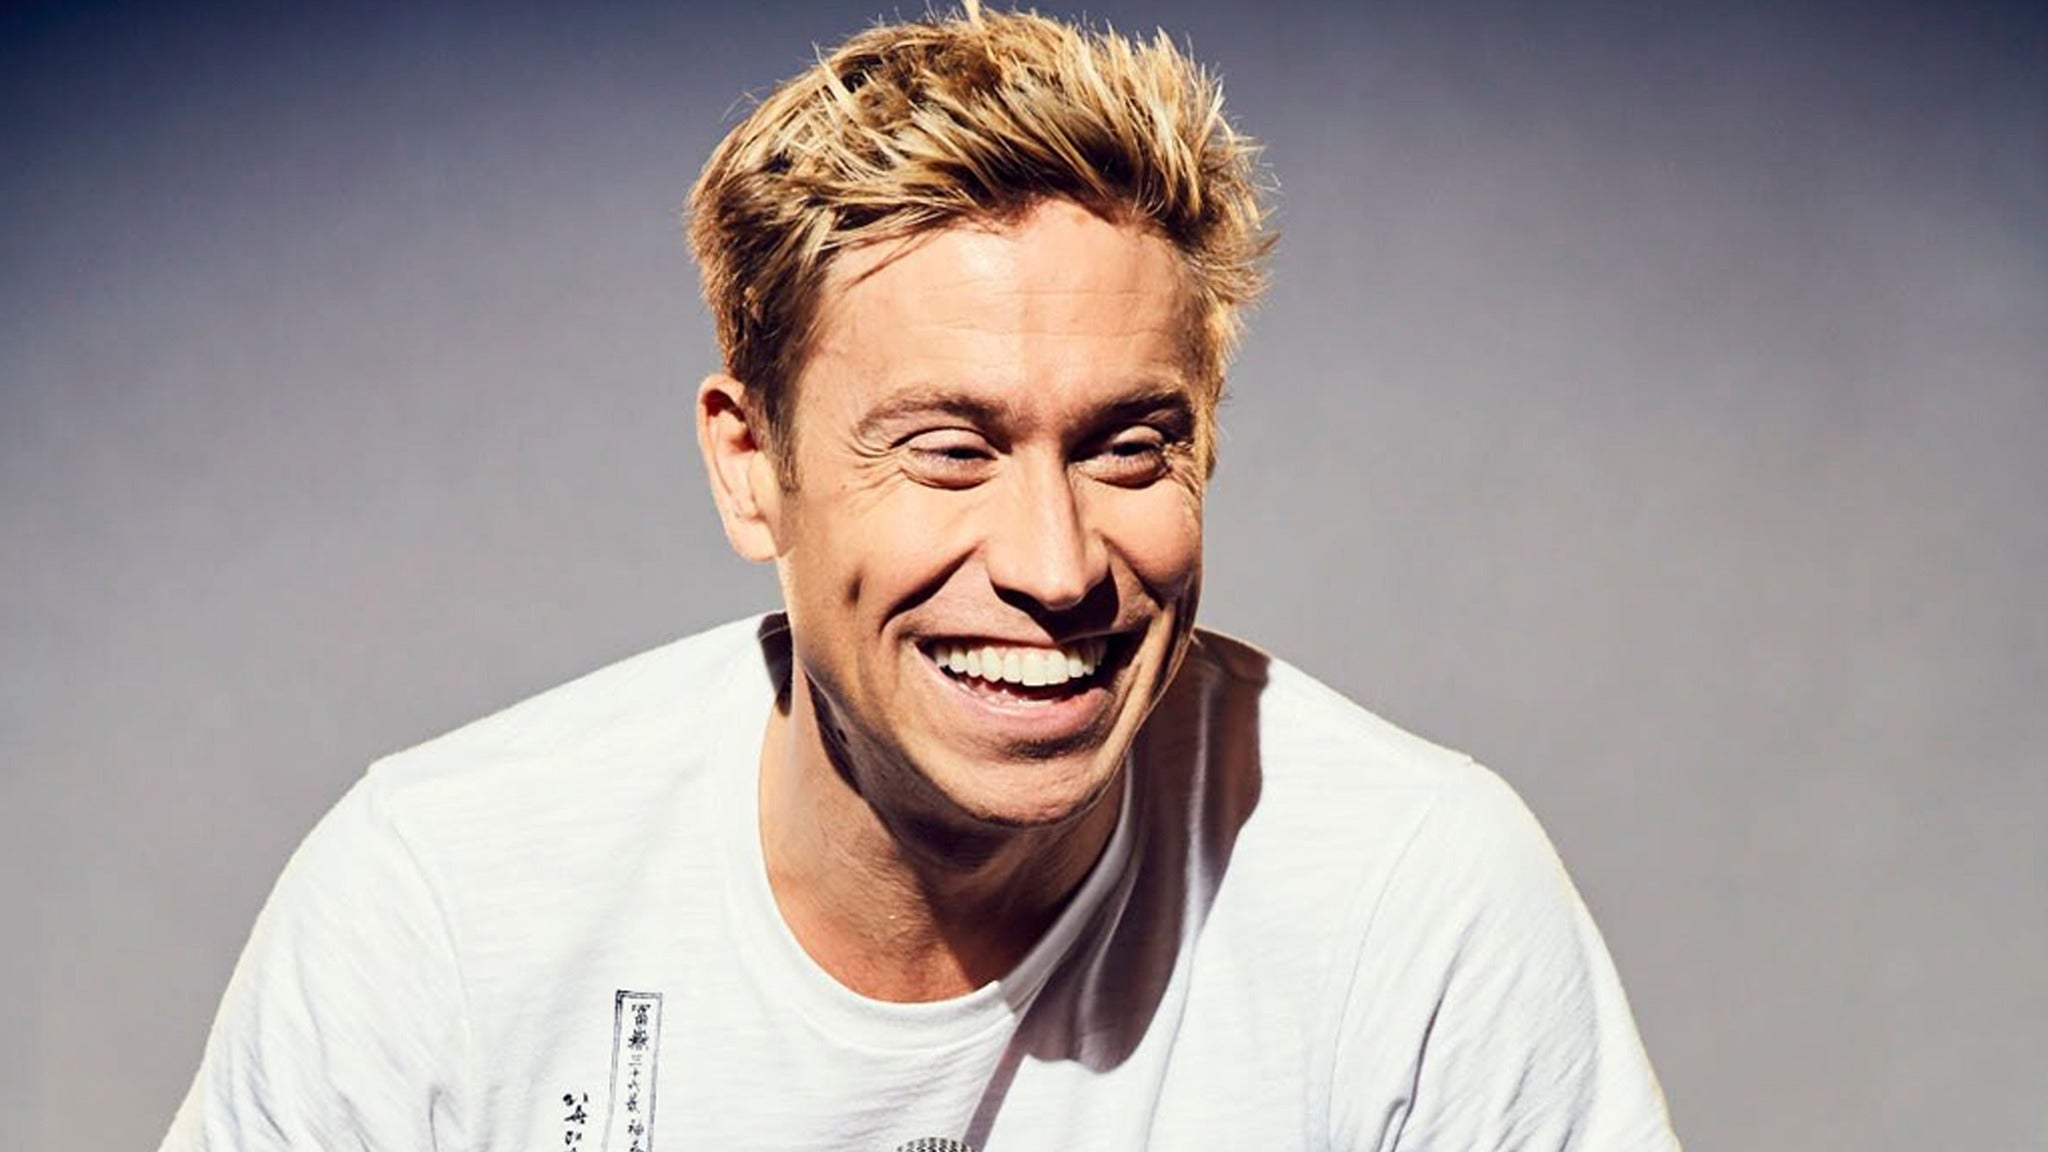 Russell Howard in Minneapolis promo photo for Live Nation Mobile App presale offer code